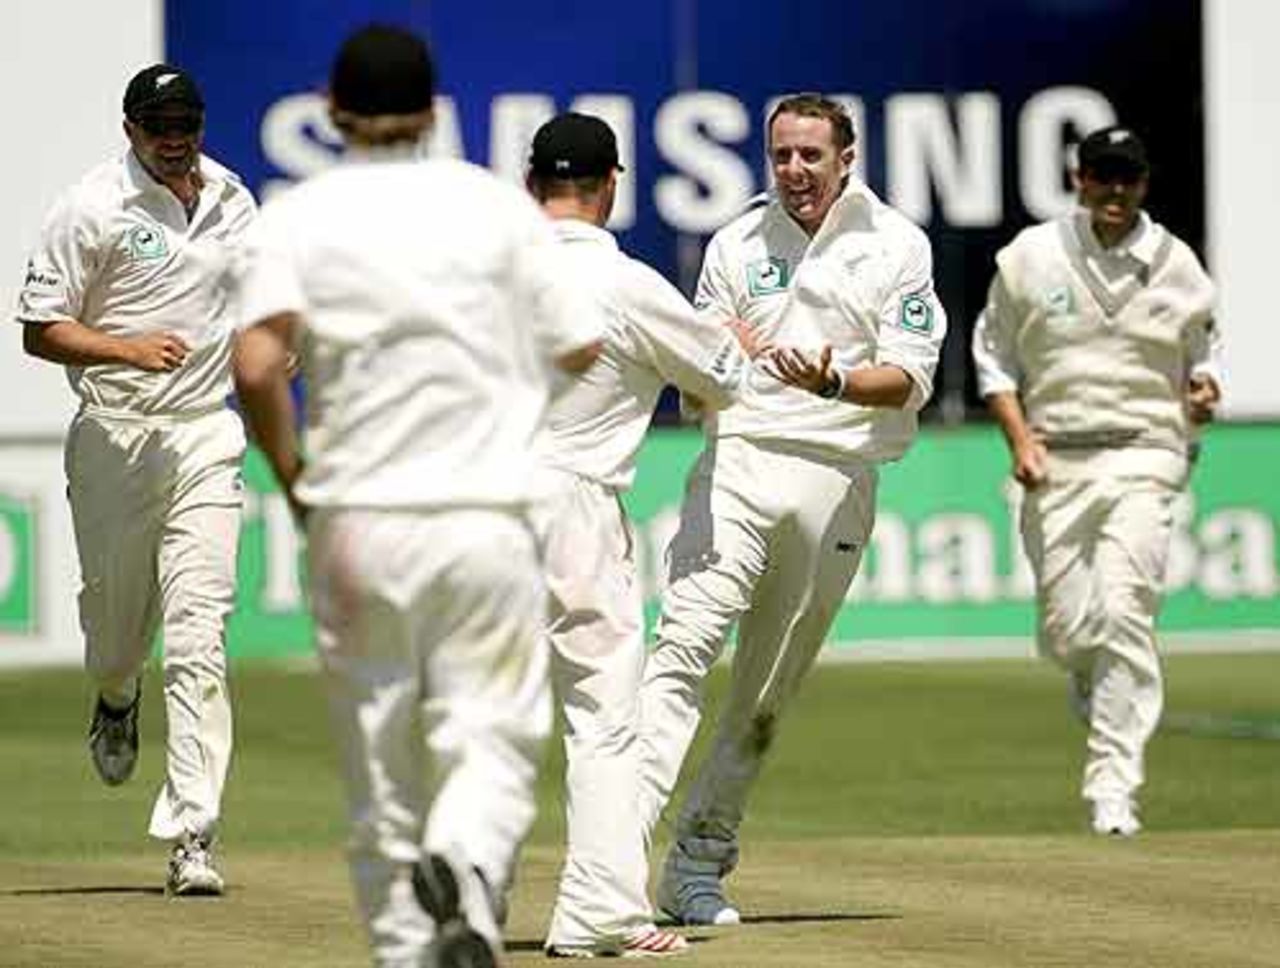 Iain O'Brien celebrates a wicket just before lunch, New Zealand v Bangladesh, 1st Test, Dunedin, 3rd day, January 6, 2008